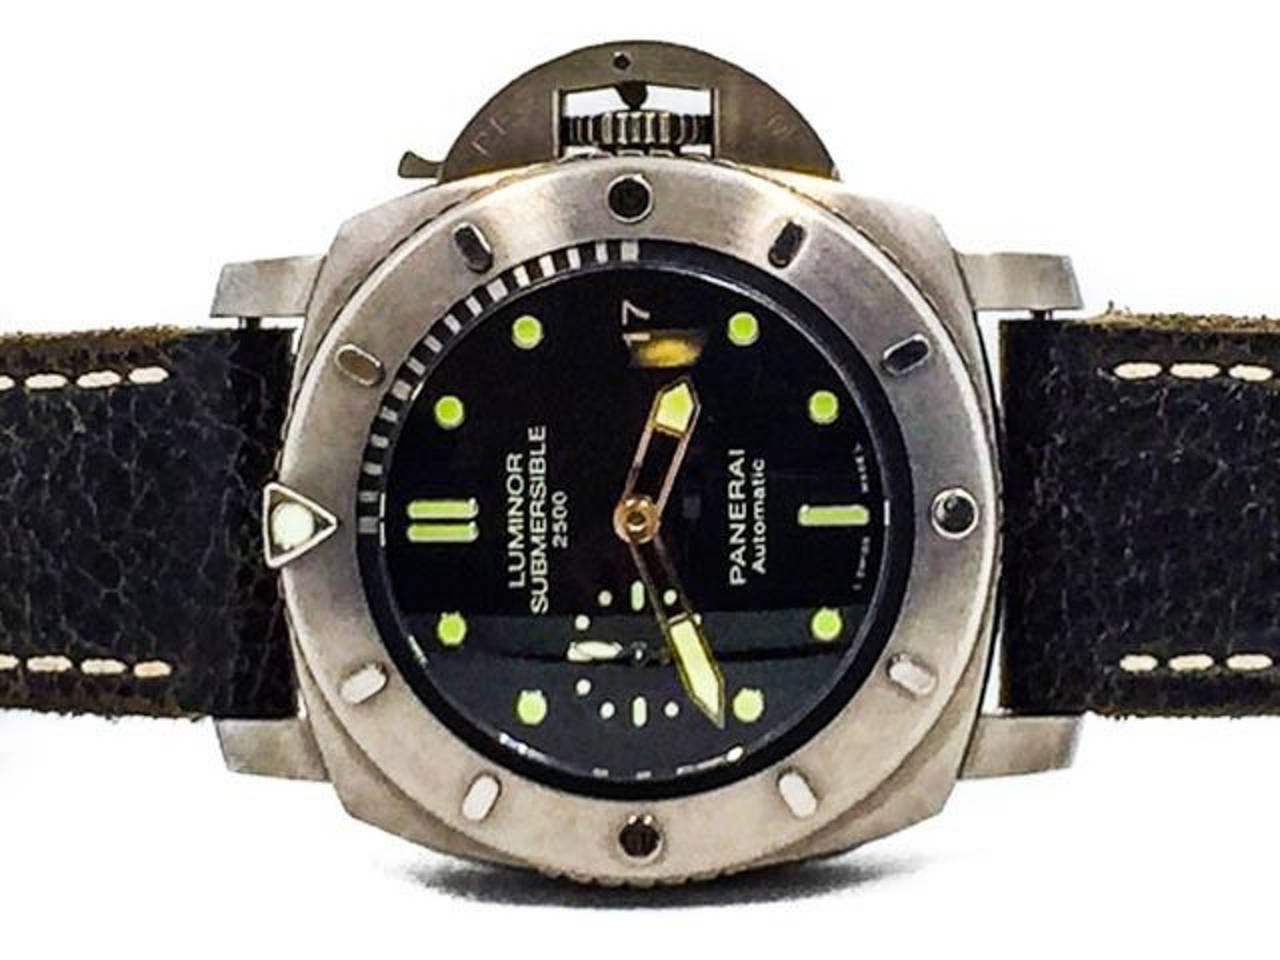 Mens 47MM Panerai PAM 364 Luminor Submersible 1950 2500M 3 Day Automatic Limited Edition watch.  The watch is in excellent condition, with a few small scratches, and keeping perfect time. The watch cert is dated December 28, 2013. Included with the